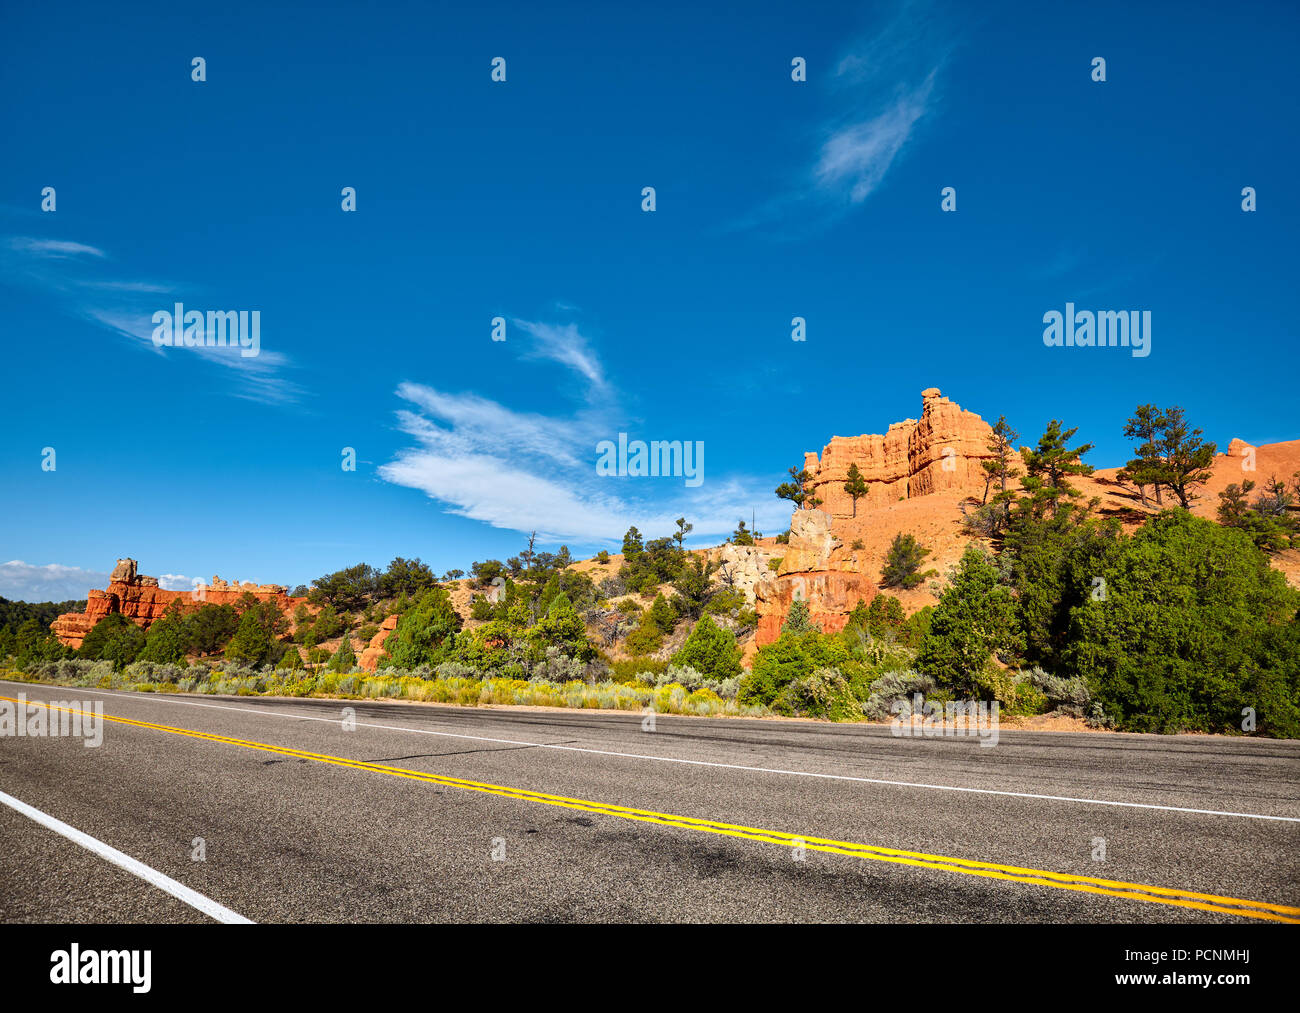 Scenic road in Bryce Canyon National Park, Utah, USA. Stock Photo